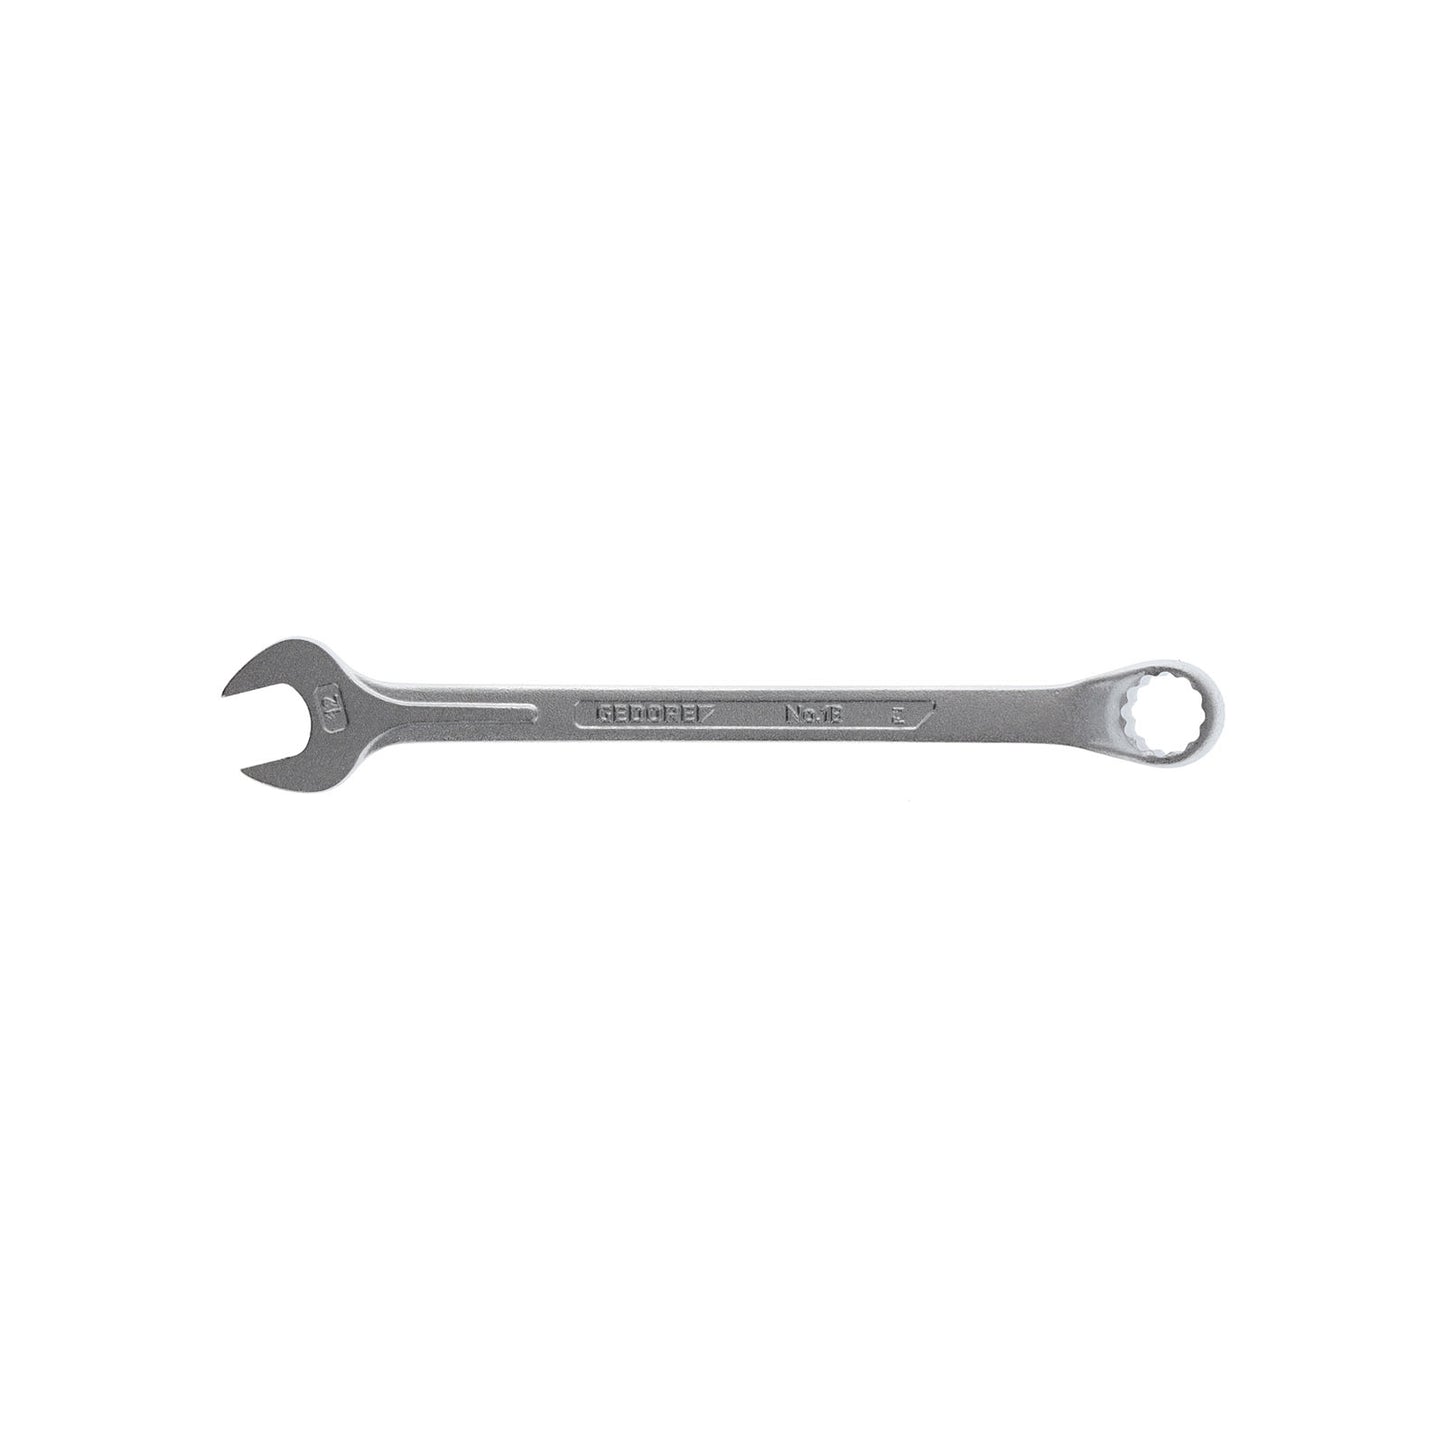 GEDORE 1 B 12 - Offset Combination Wrench, 12mm (6001050)